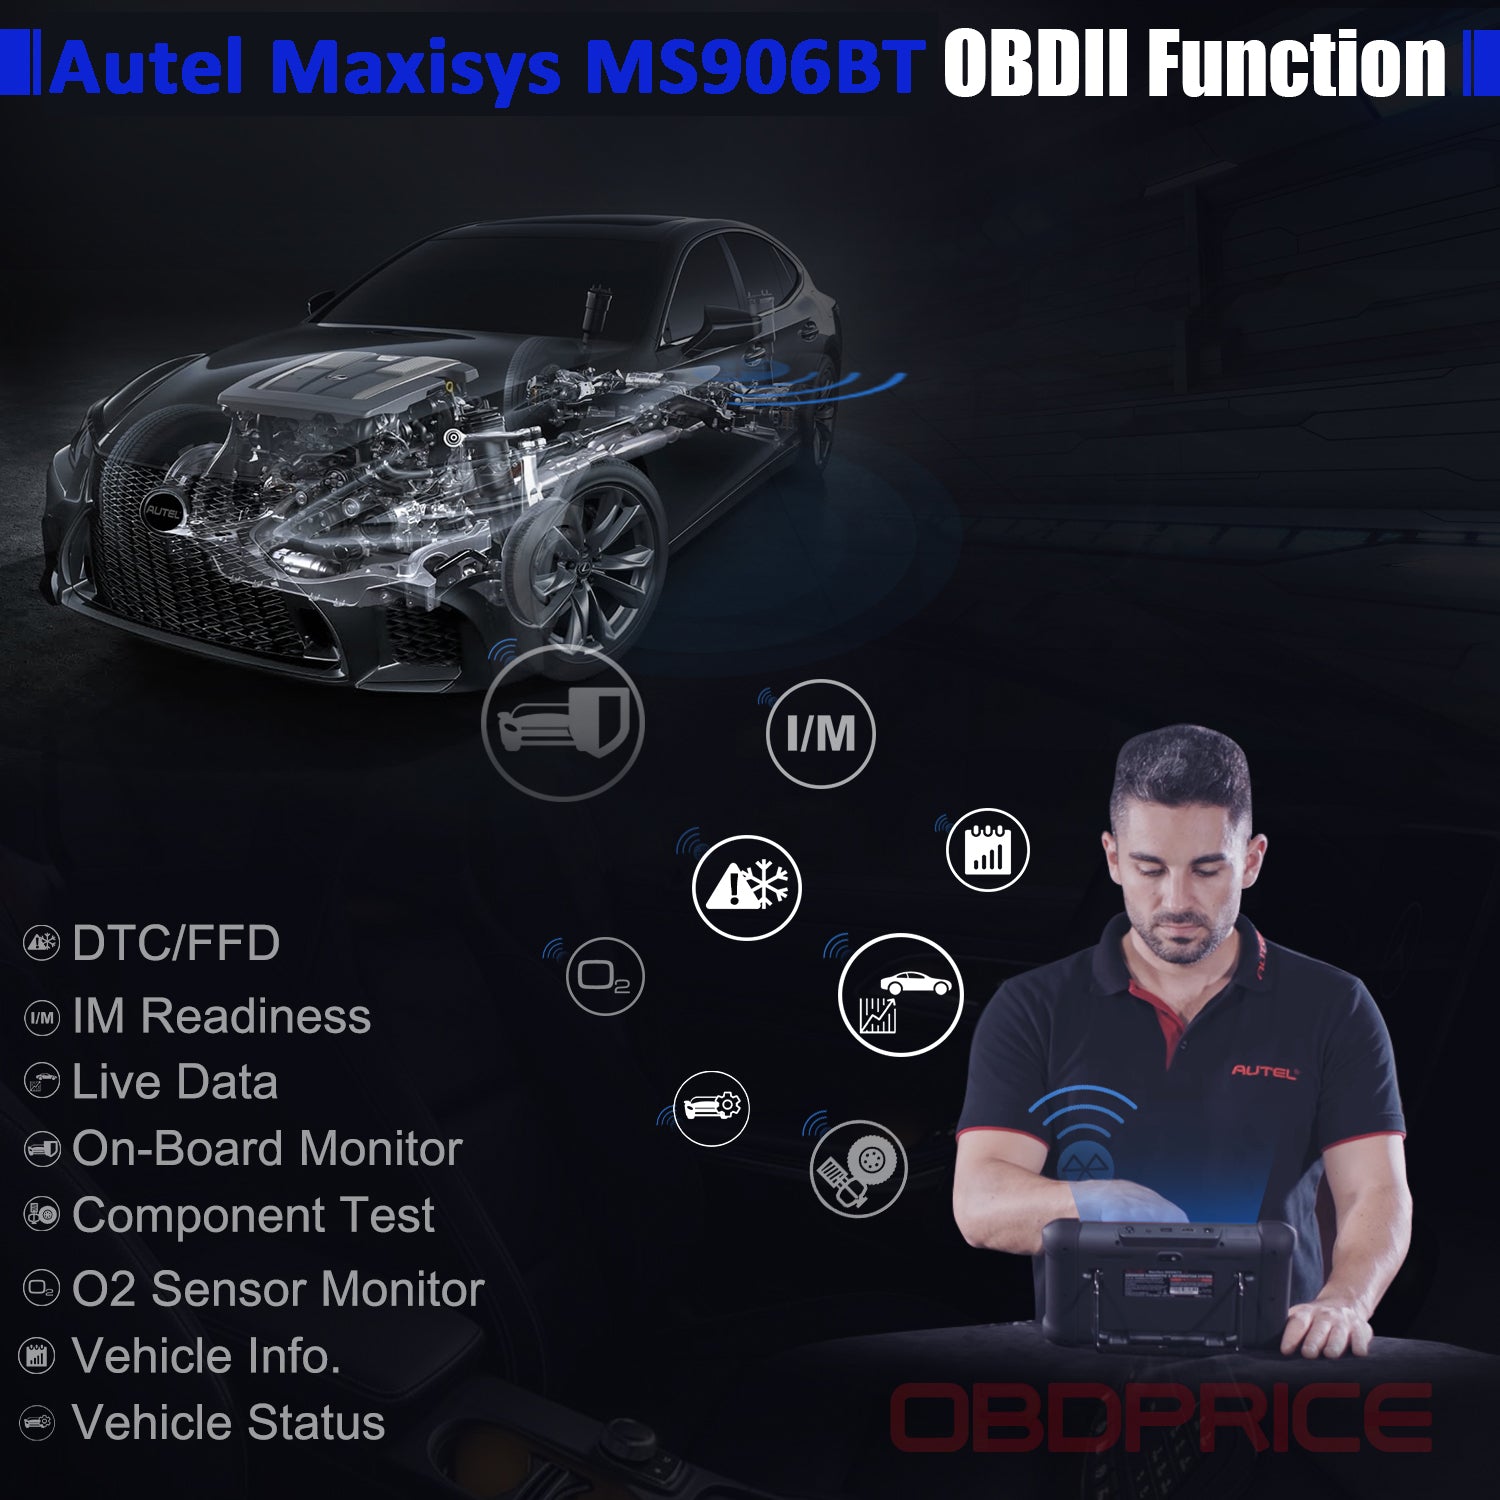 Autel Maxisys MS906BT Bluetooth OBD2 Diagnostic Tool complete obd2 functions